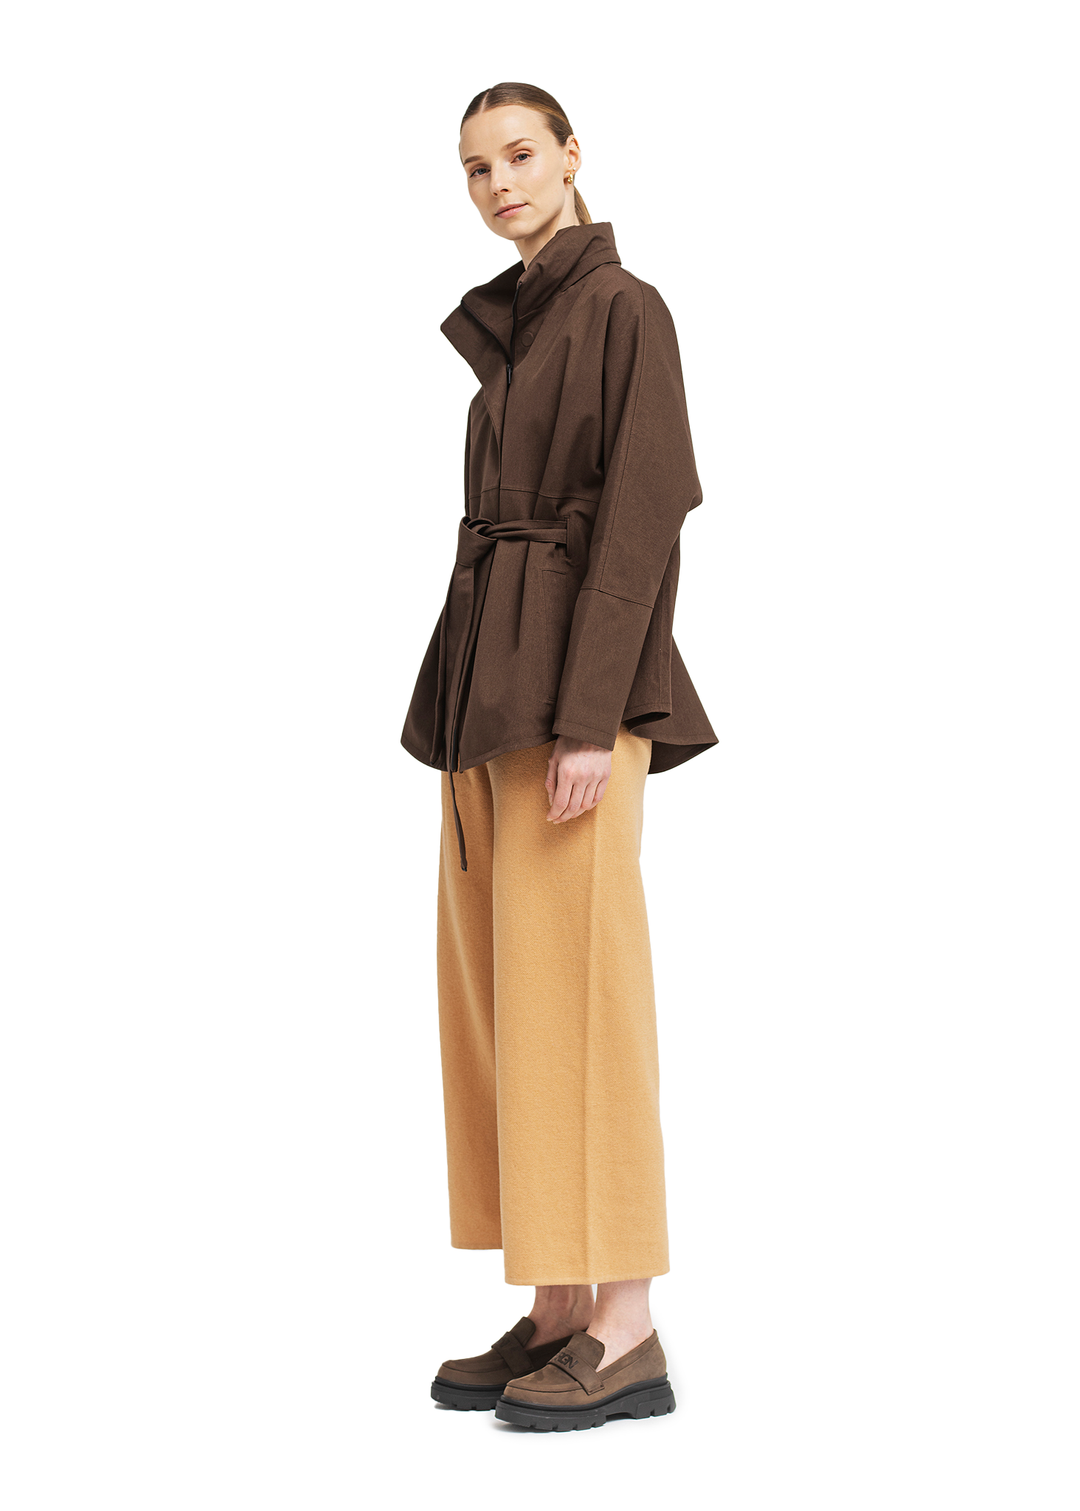 BRGN by Lunde & Gaundal Kuling Poncho Coats 187 Chocolate Brown